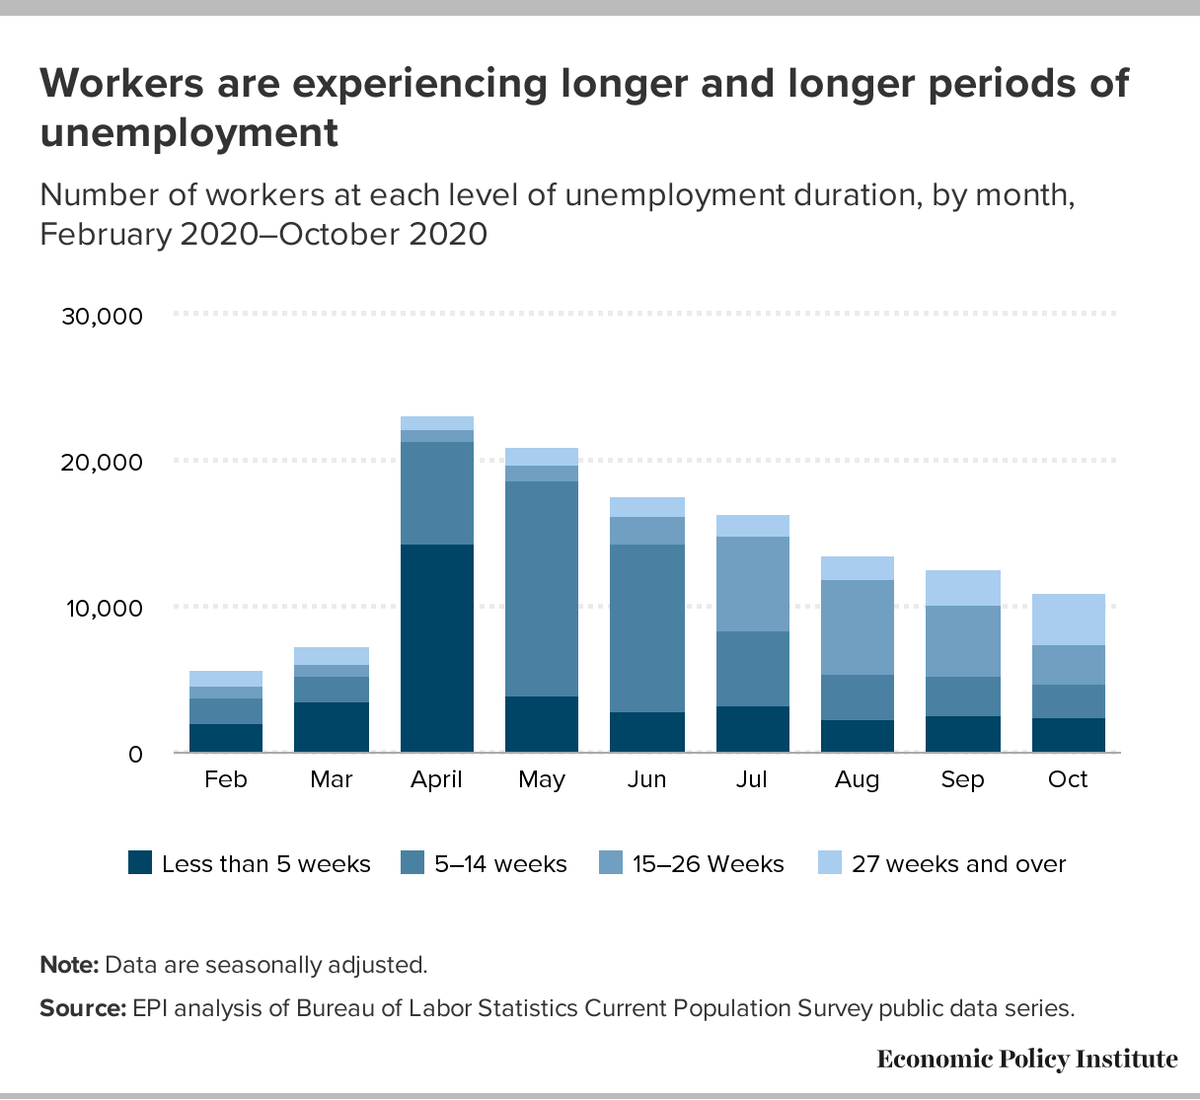 Long-term unemployment (27+ wks) continues to rise, up 1.2mil in October. With the expiration of enhanced (PUA) and extended (PUEC) unemployment insurance benefits set to expire on December 26th, it is clear that more pain is on the horizon for these workers and their families.7